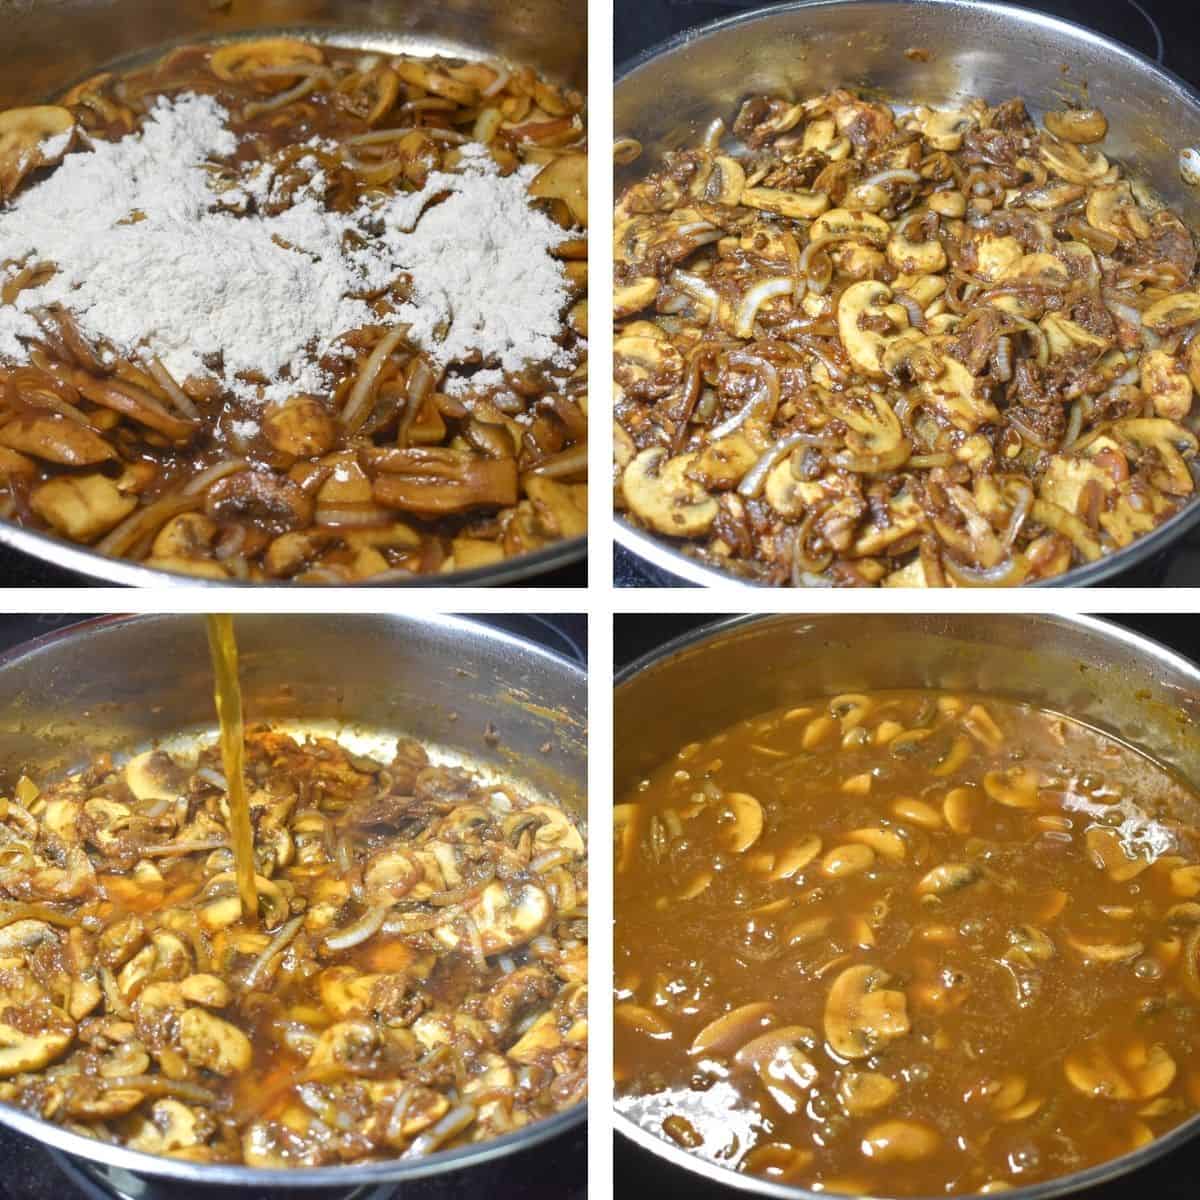 Four images showing the steps to making the mushroom gravy.